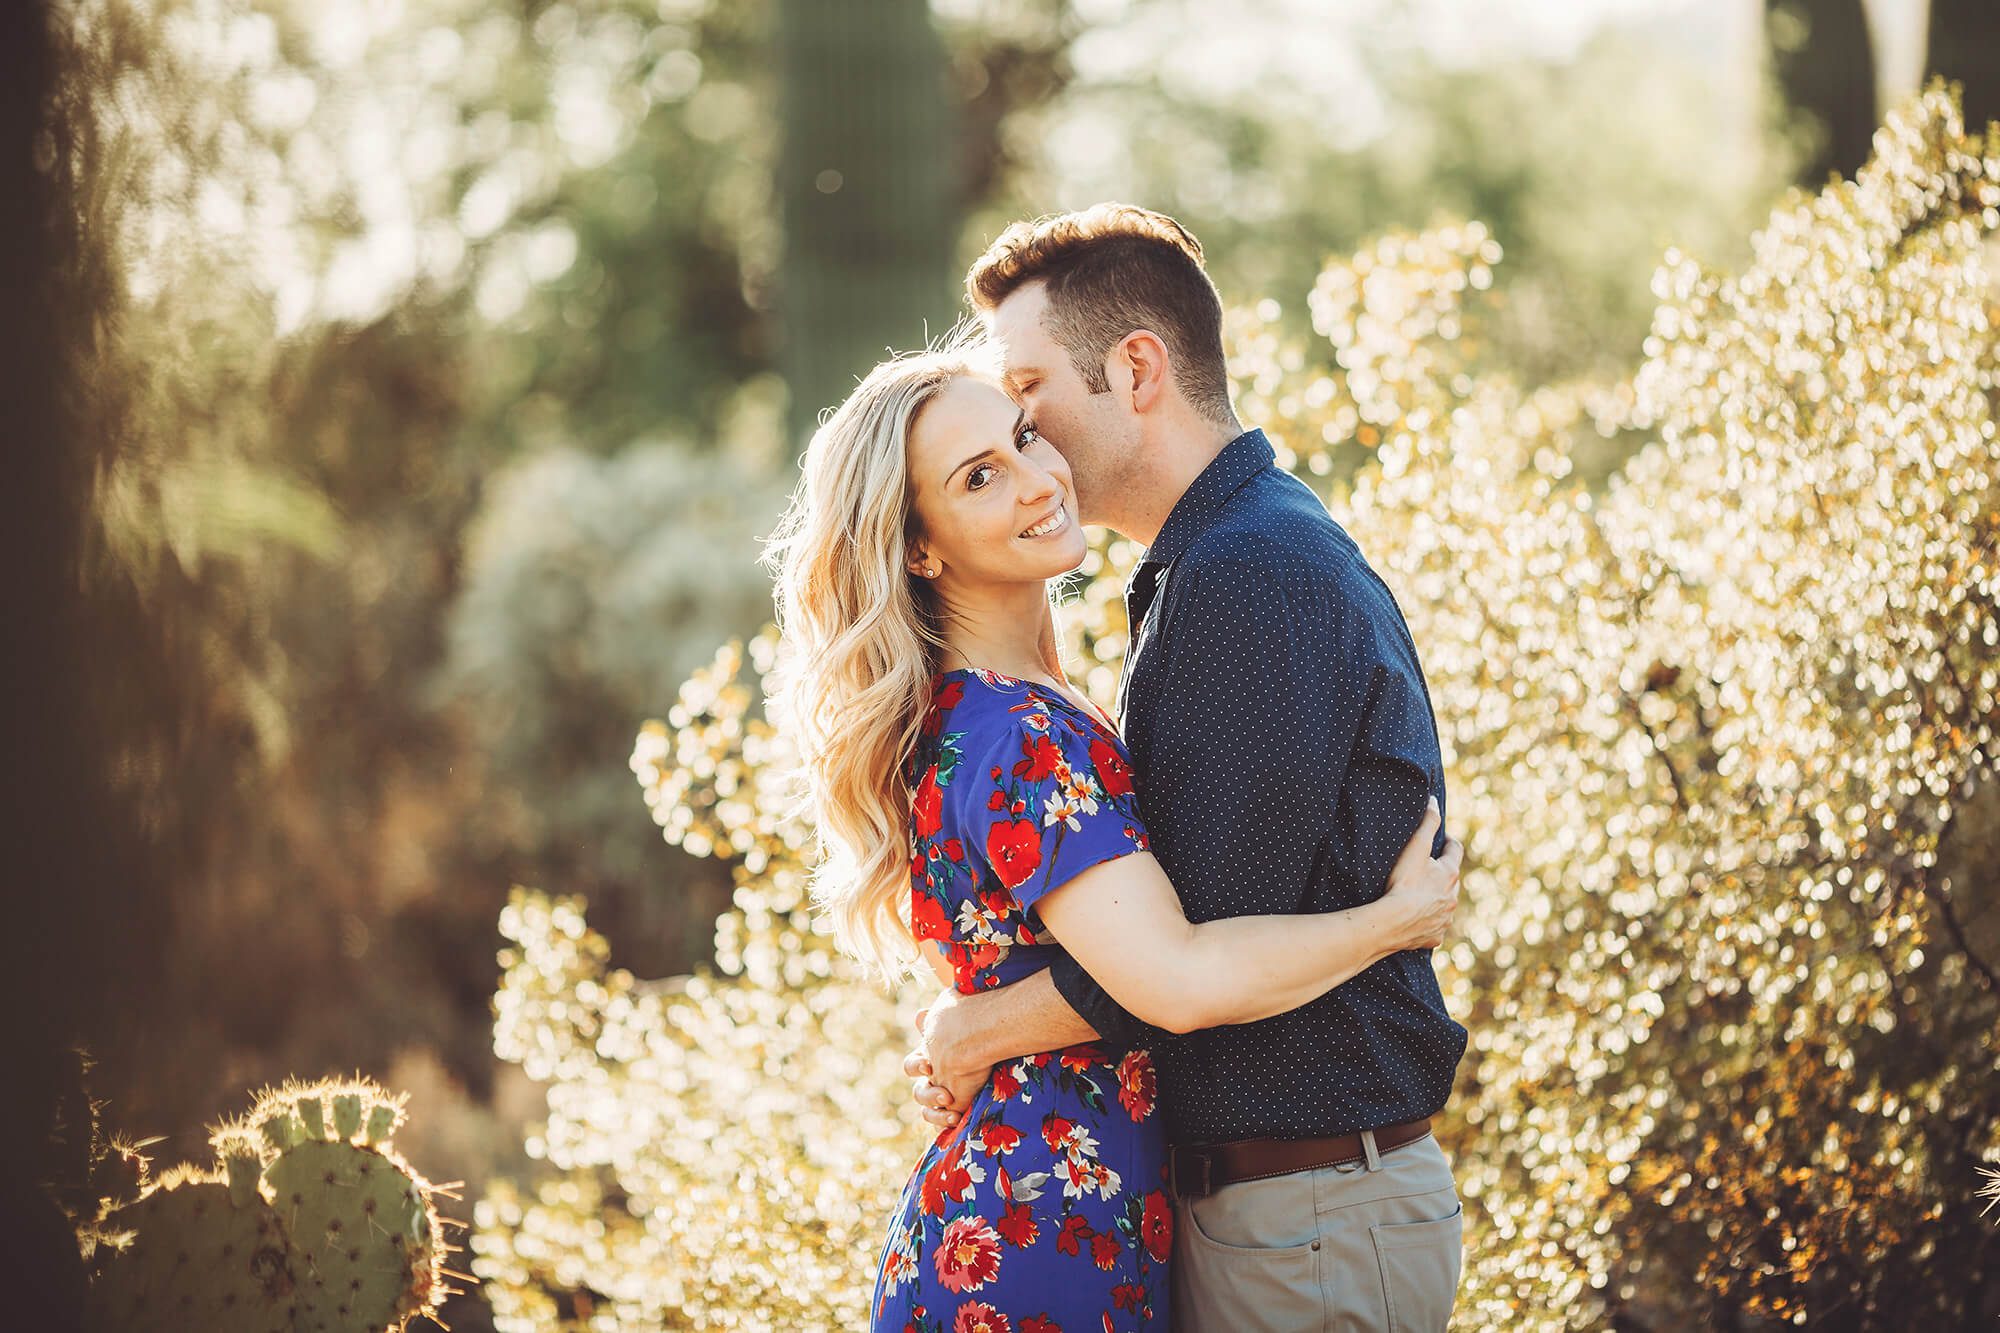 A loving kiss by Shaun on Ally's cheek during their Sabino Canyon engagement session